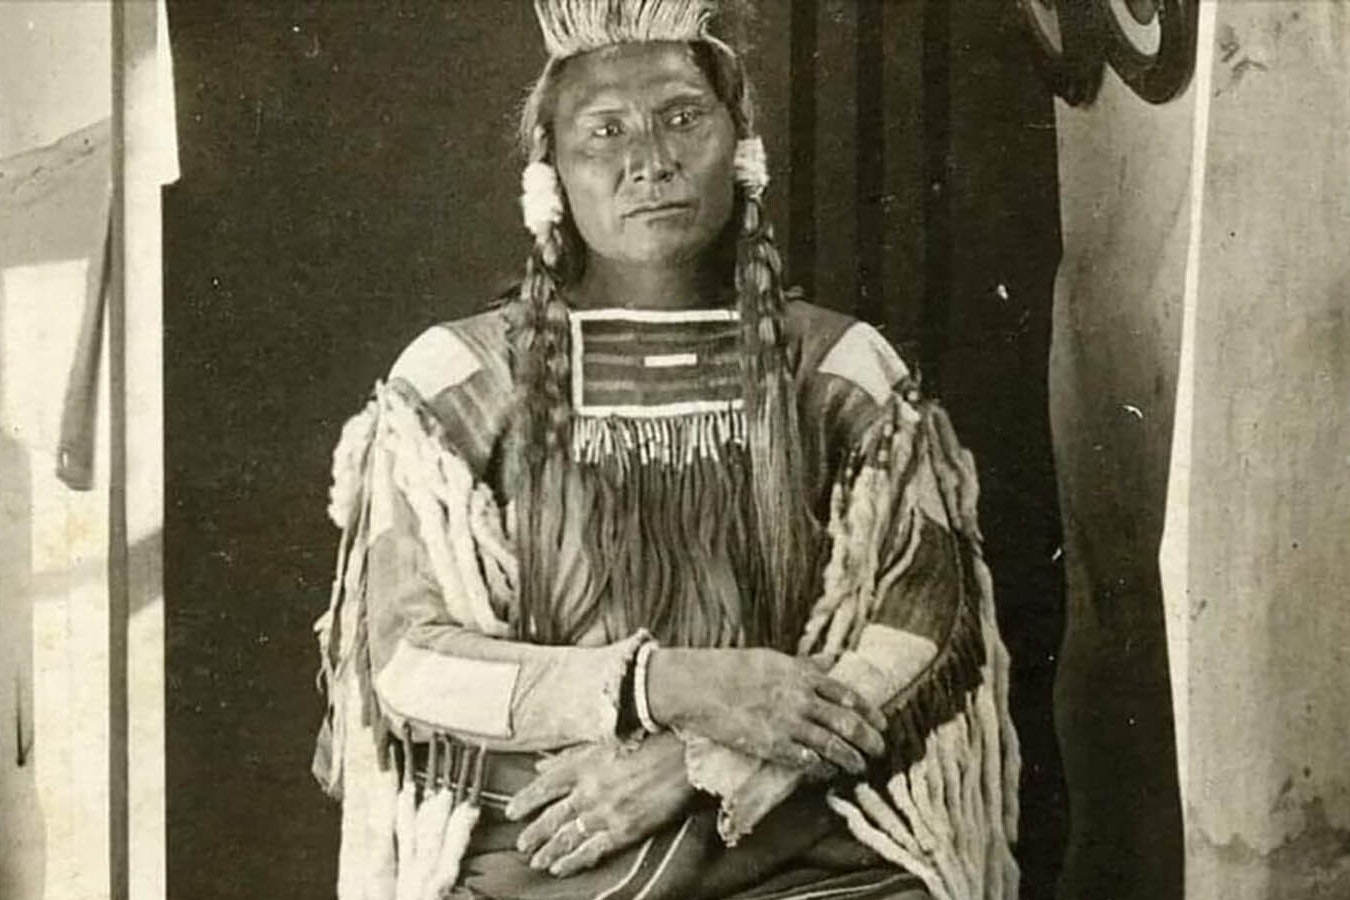 A historic photo of a New Perce Indian.